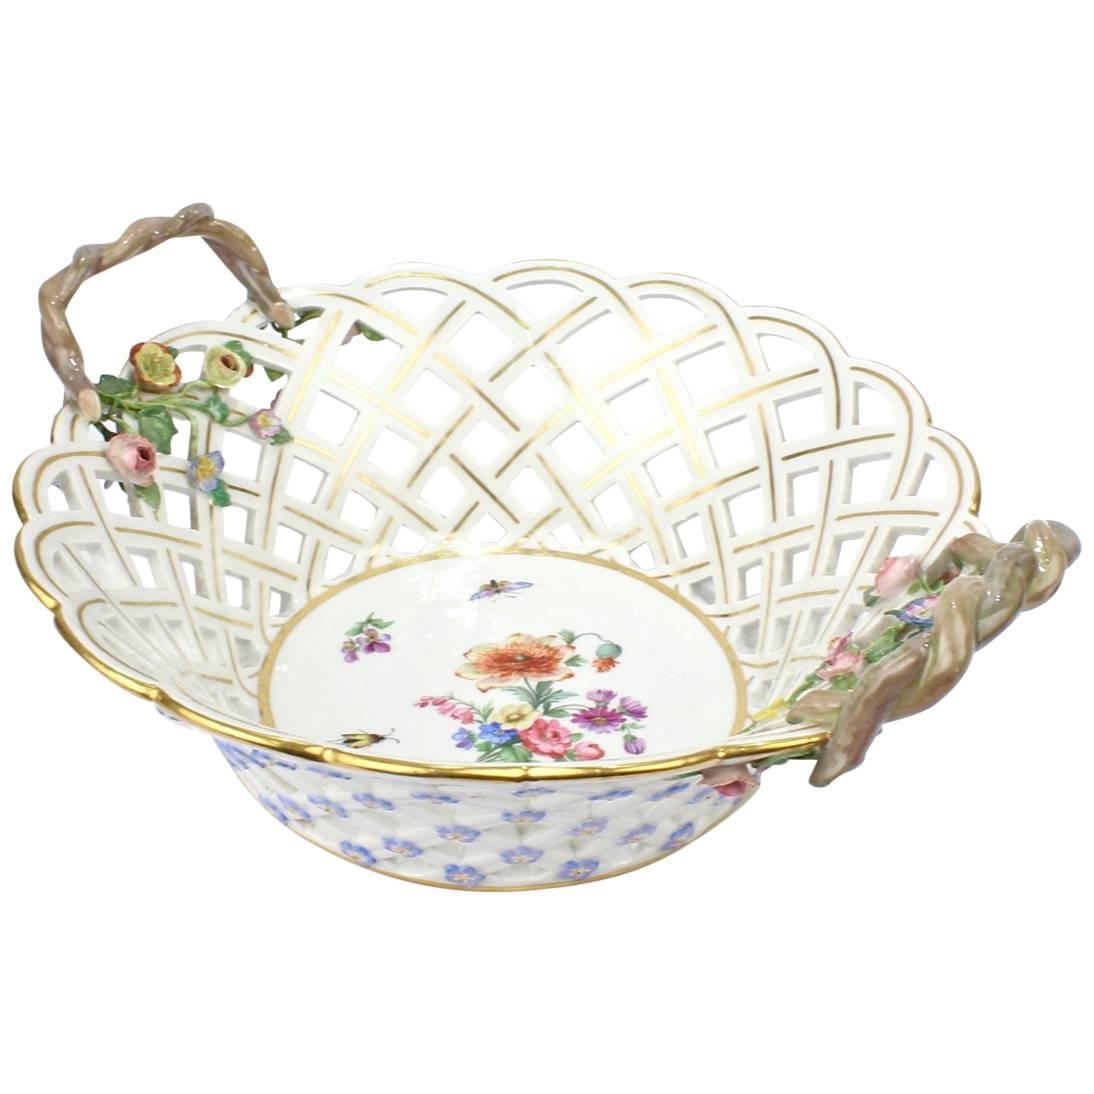 Antique 19th Century Meissen Porcelain Reticulated Fruit Basket with Flowers